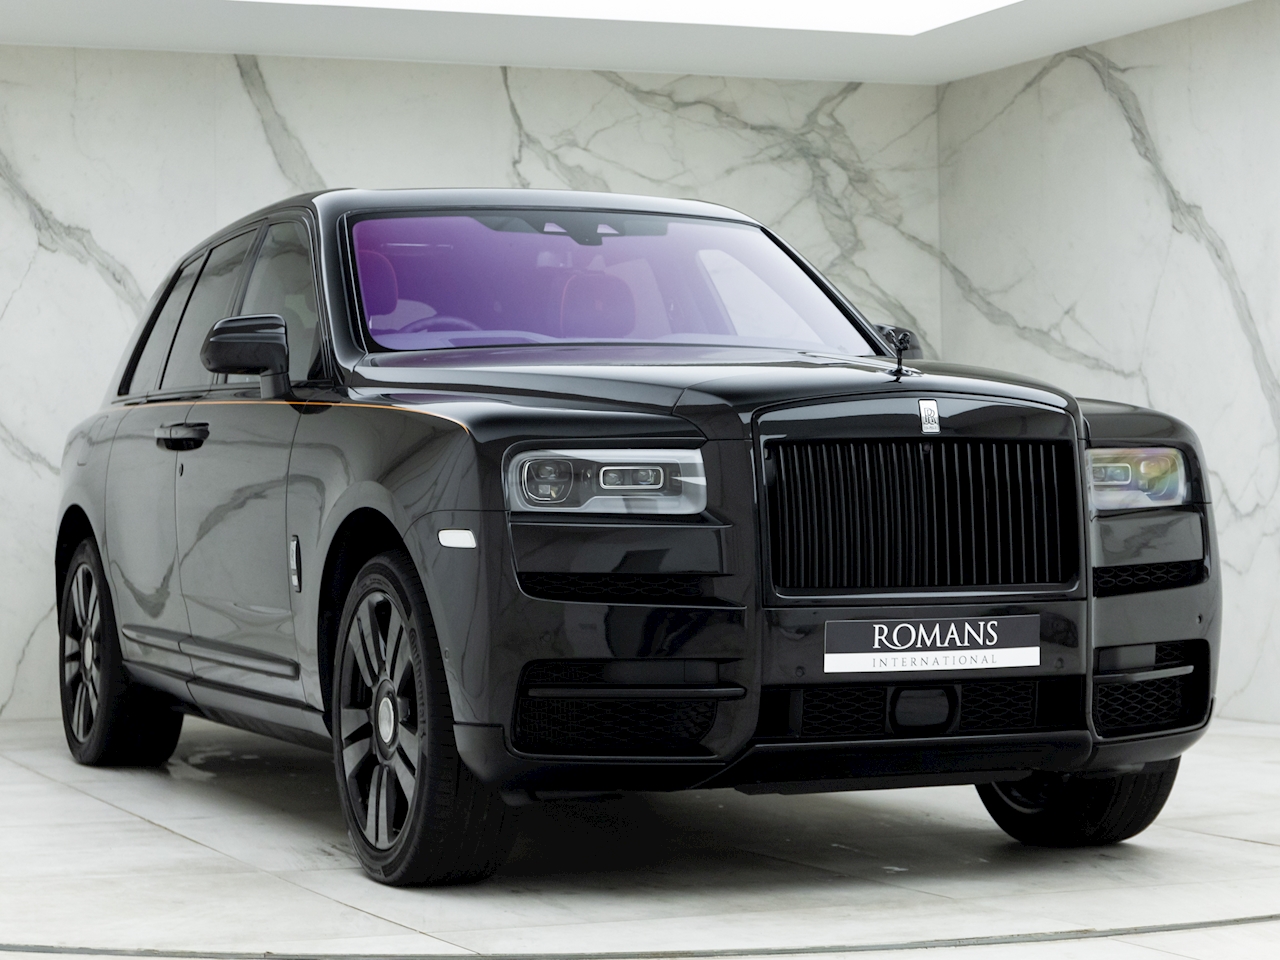 Used RollsRoyce Cars for Sale Right Now  Autotrader